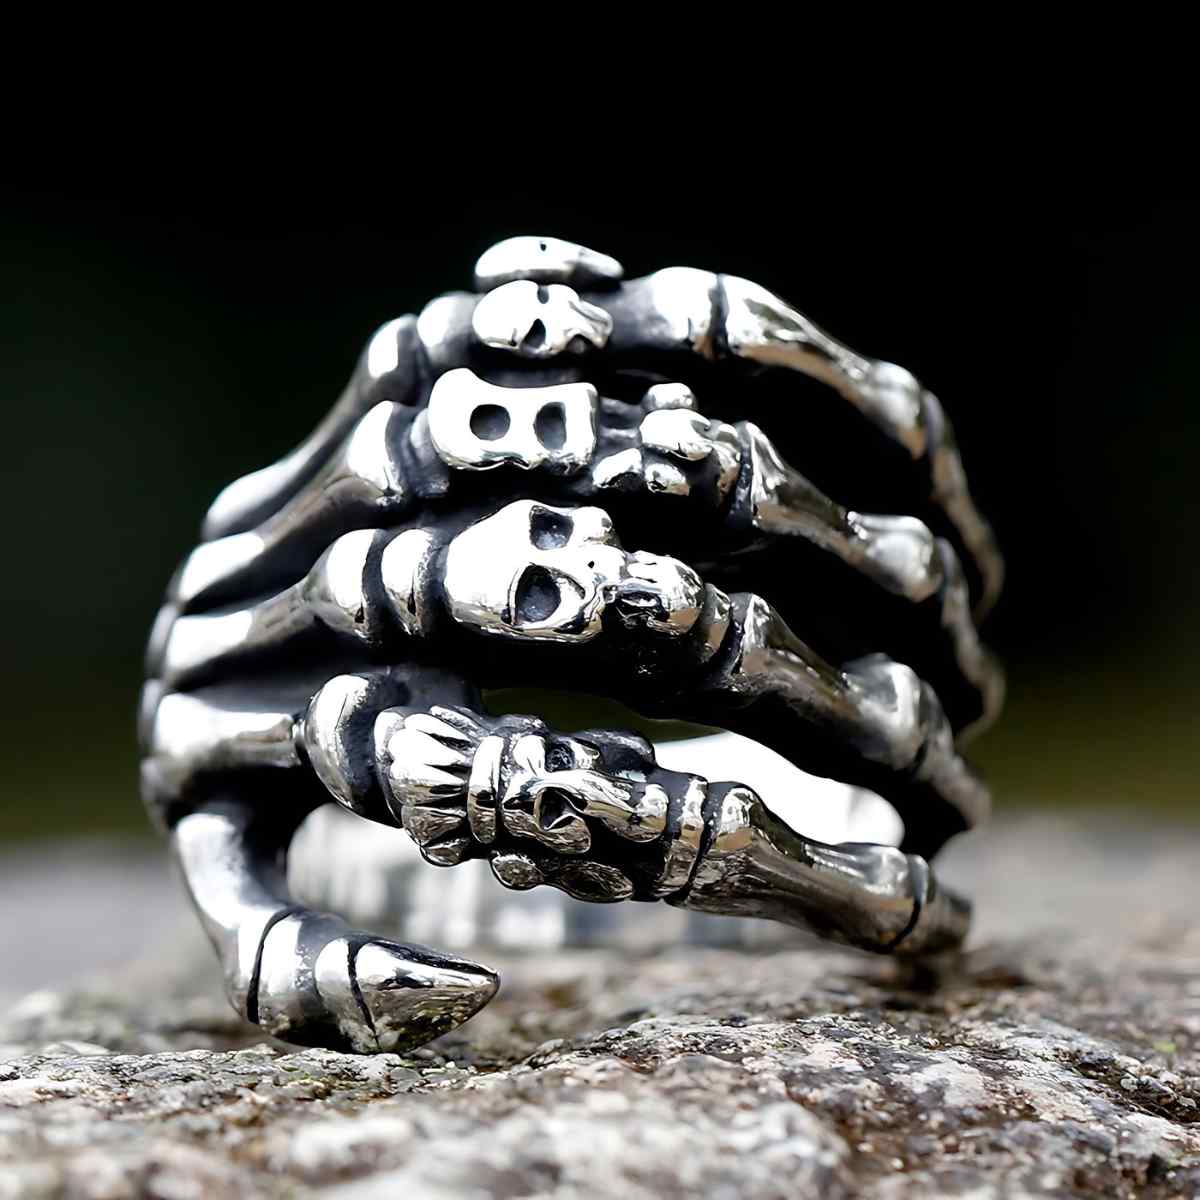 Skeleton Hand Ring Stainless Steel Xenos Jewelry